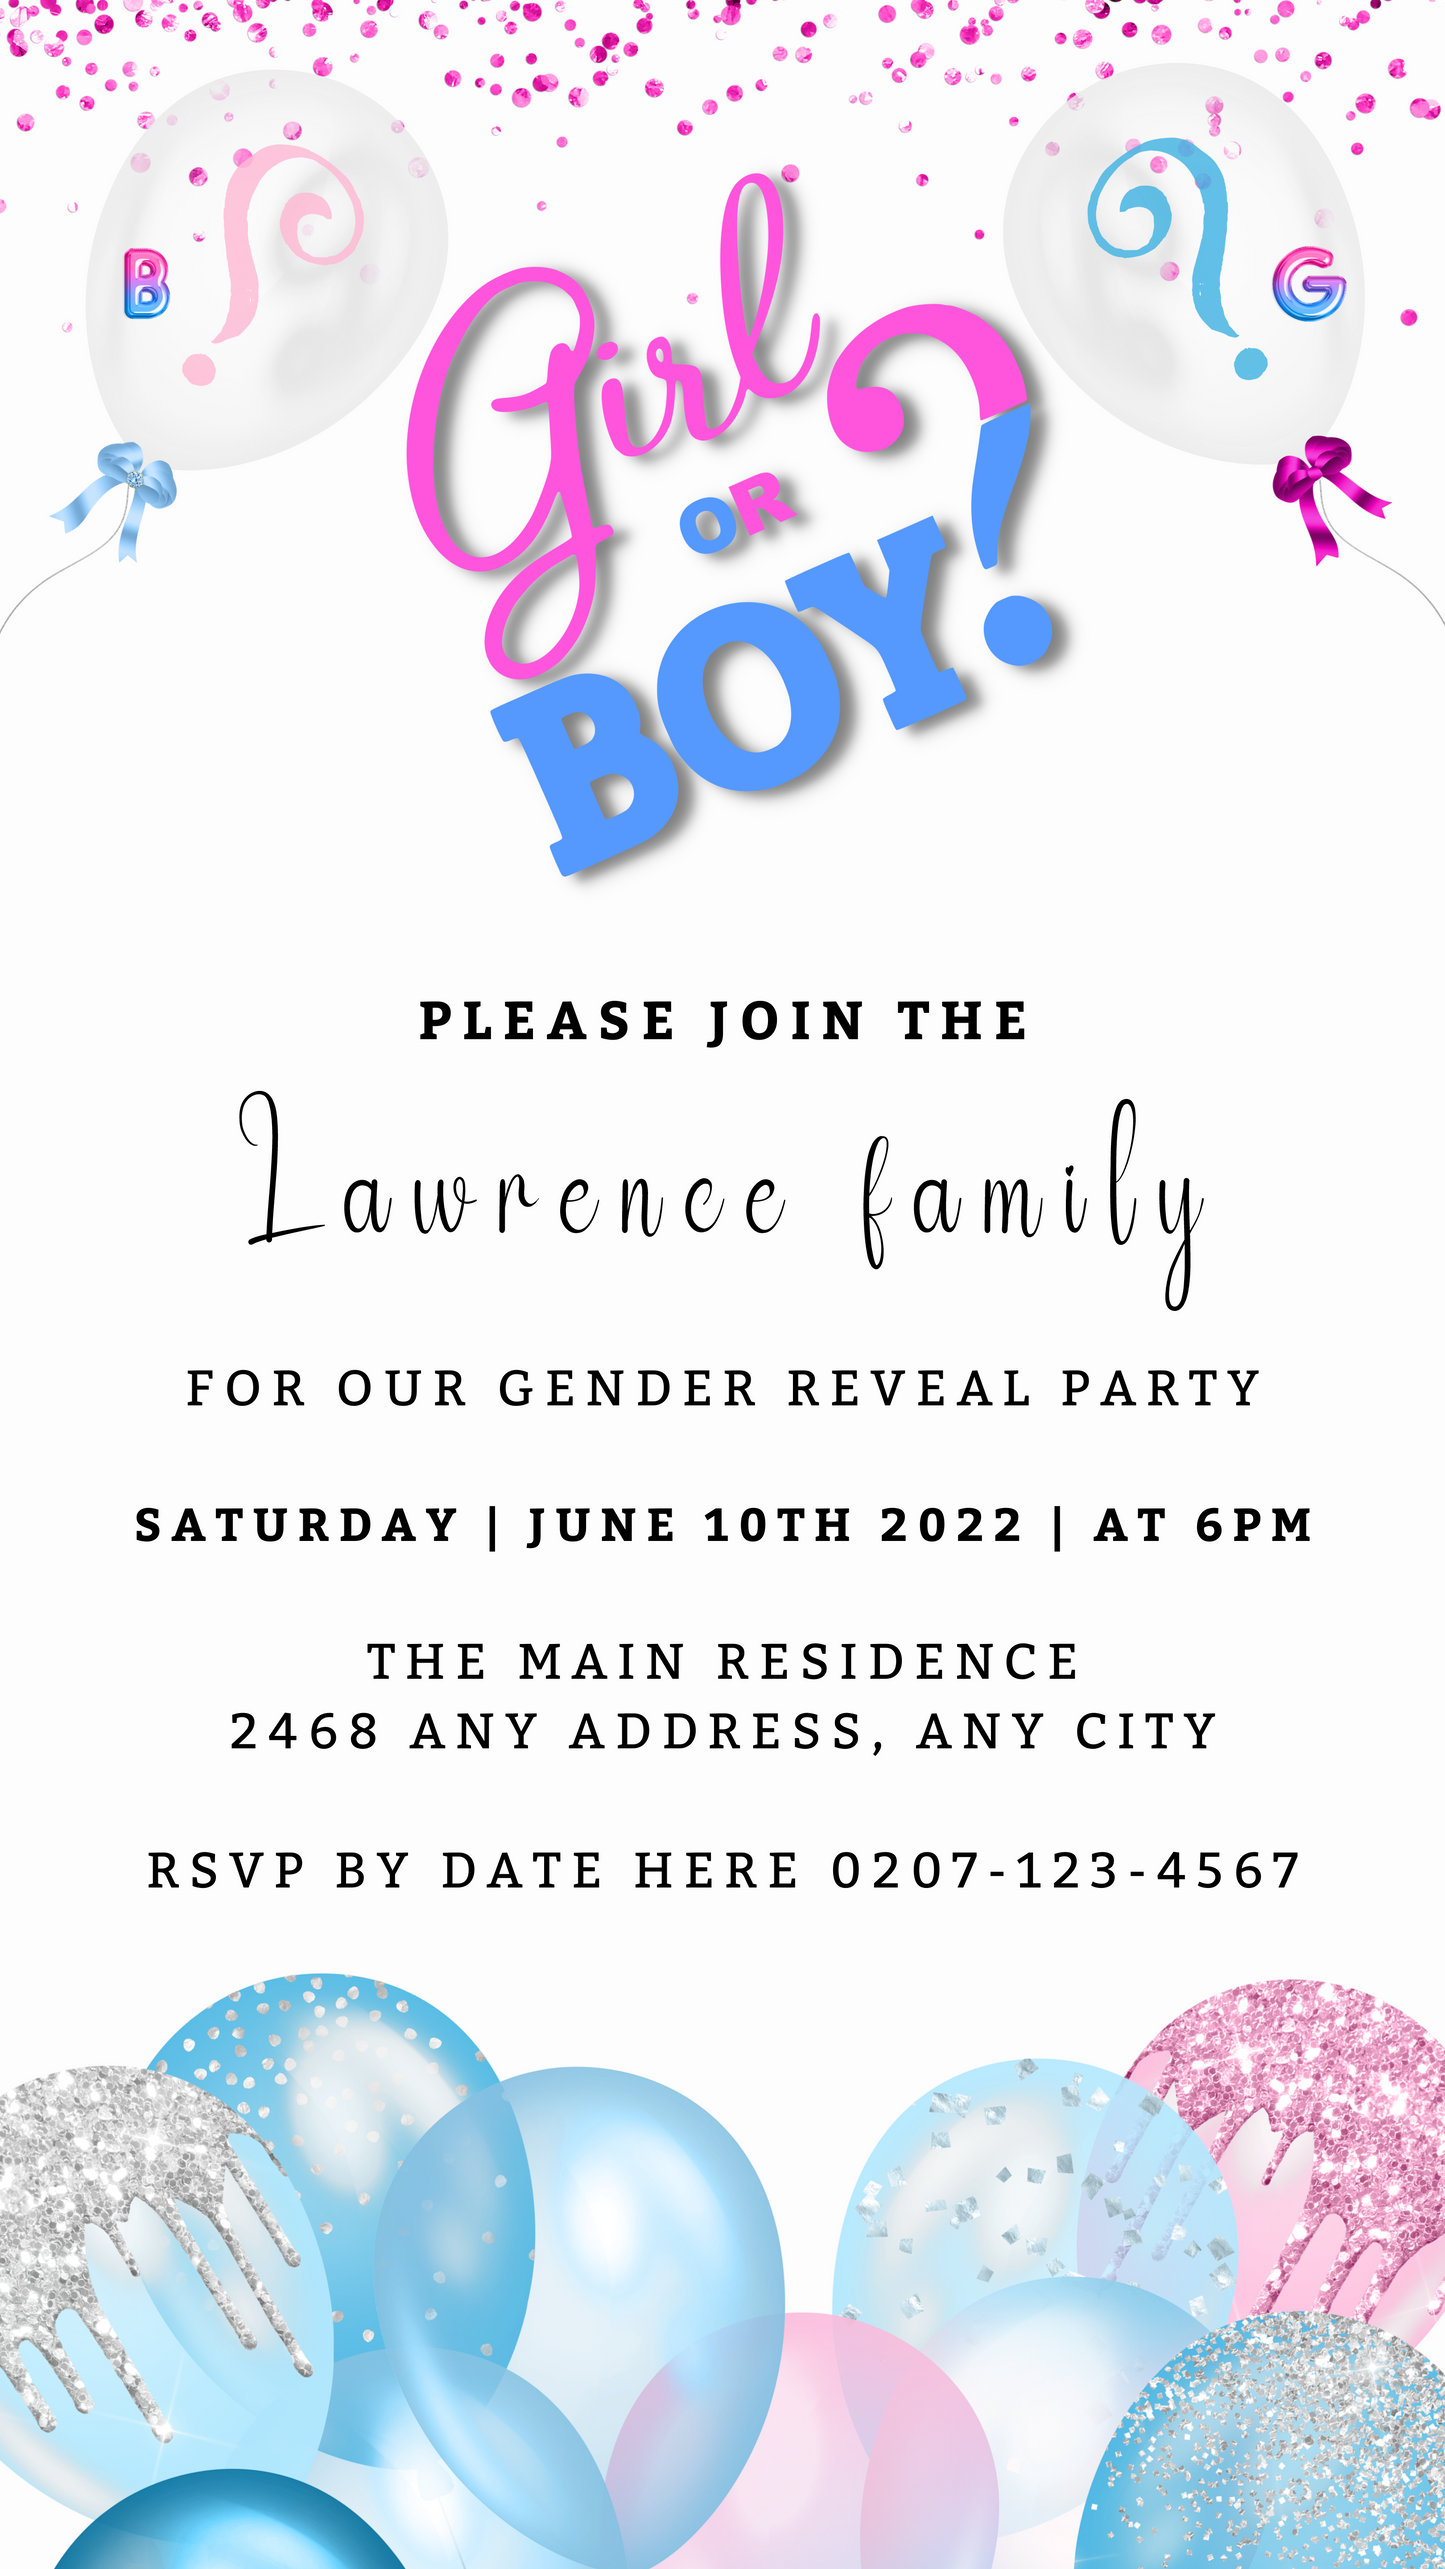 Customizable Gender Reveal Evite featuring blue and pink balloons, editable text, and confetti for a personalized digital invitation. Ideal for smartphone sharing.